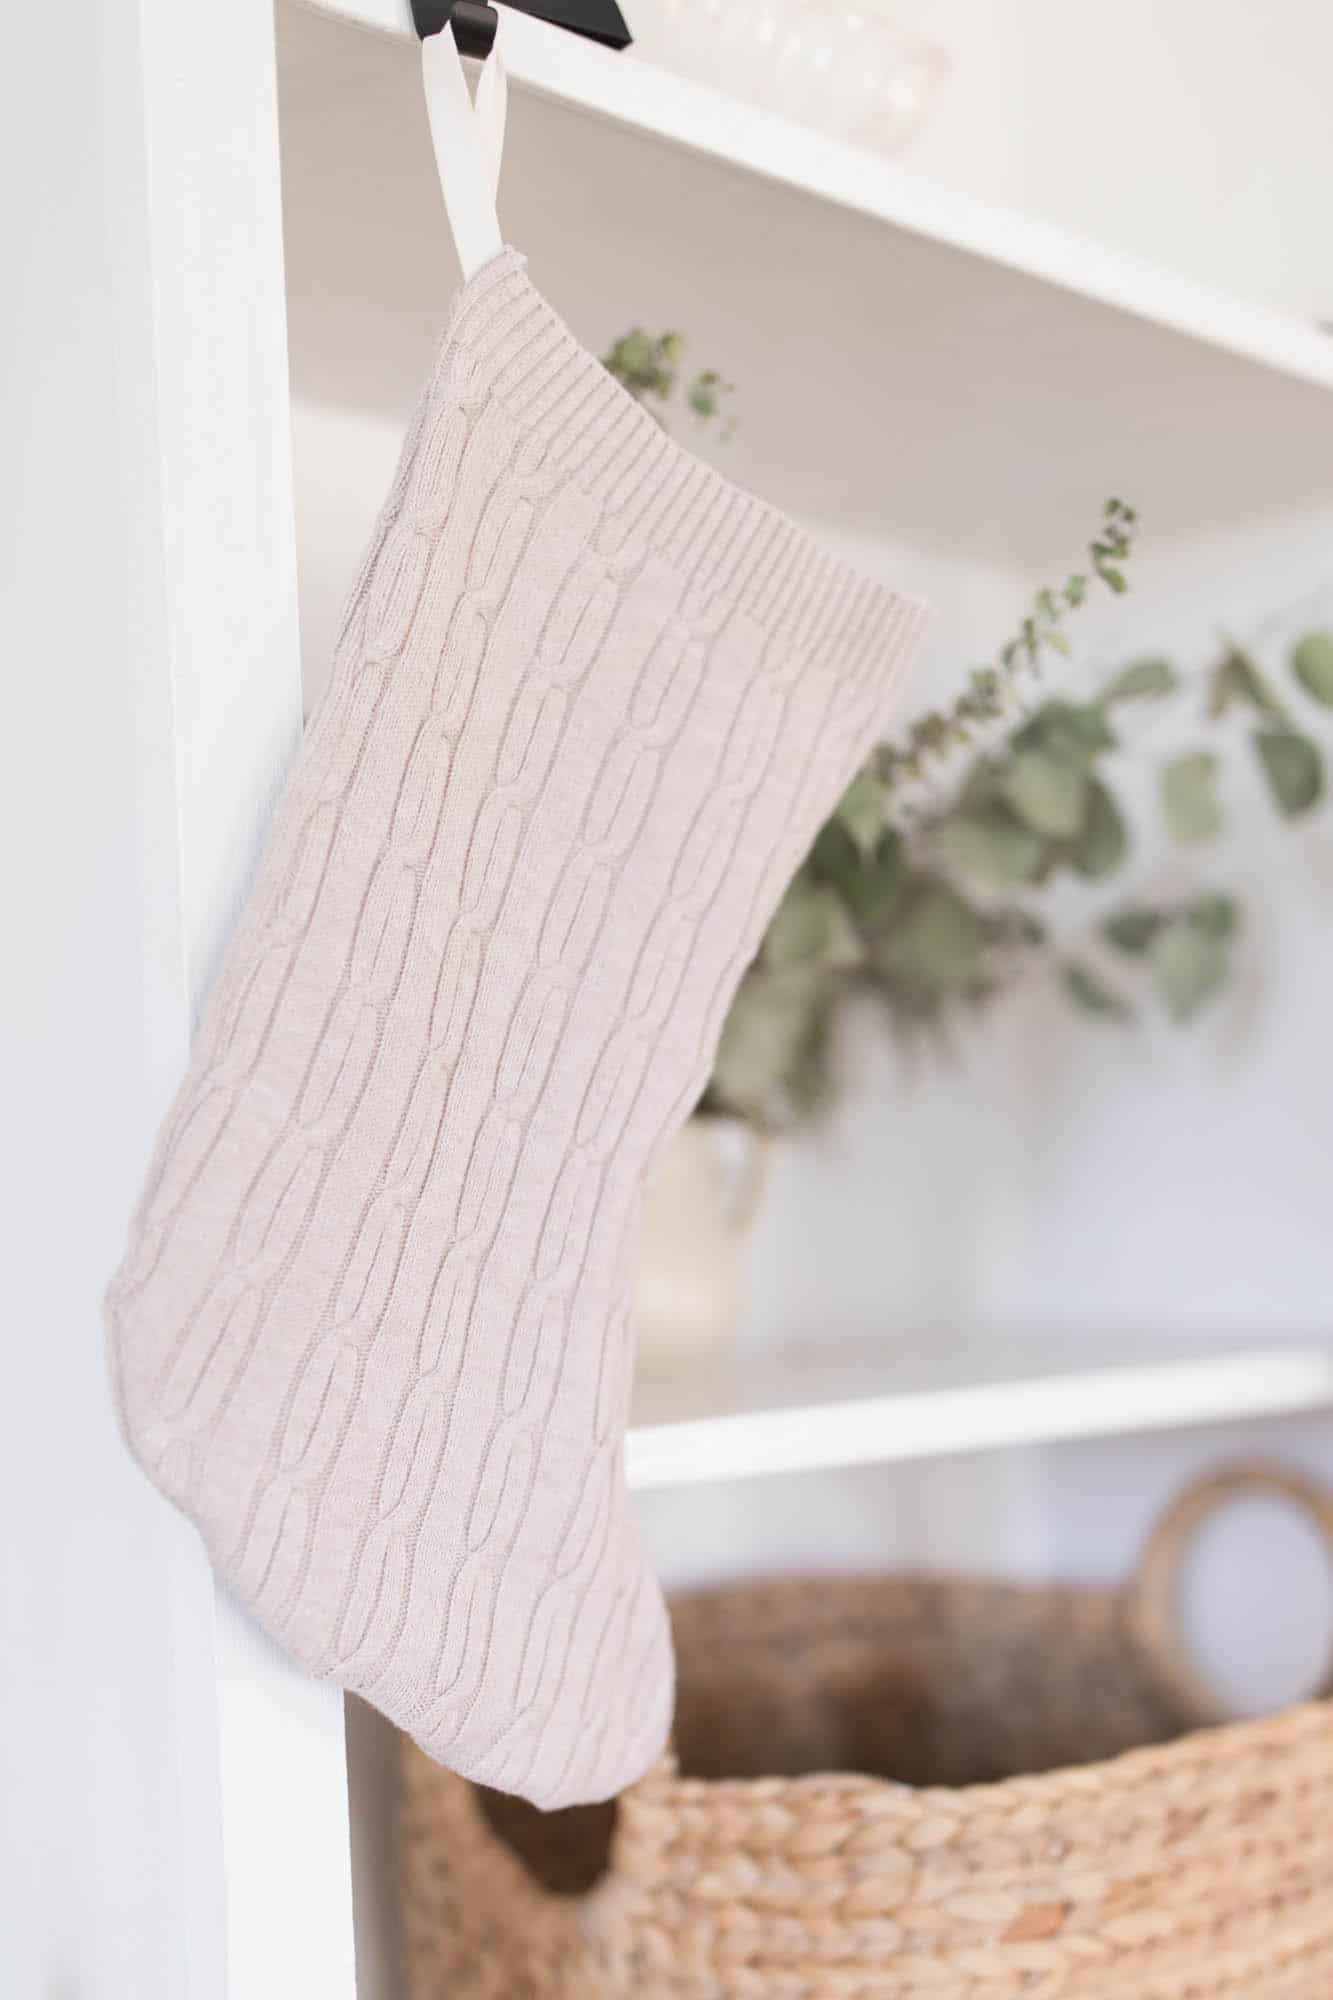 DIY Stockings from Sweaters Sewing Video Tutorial